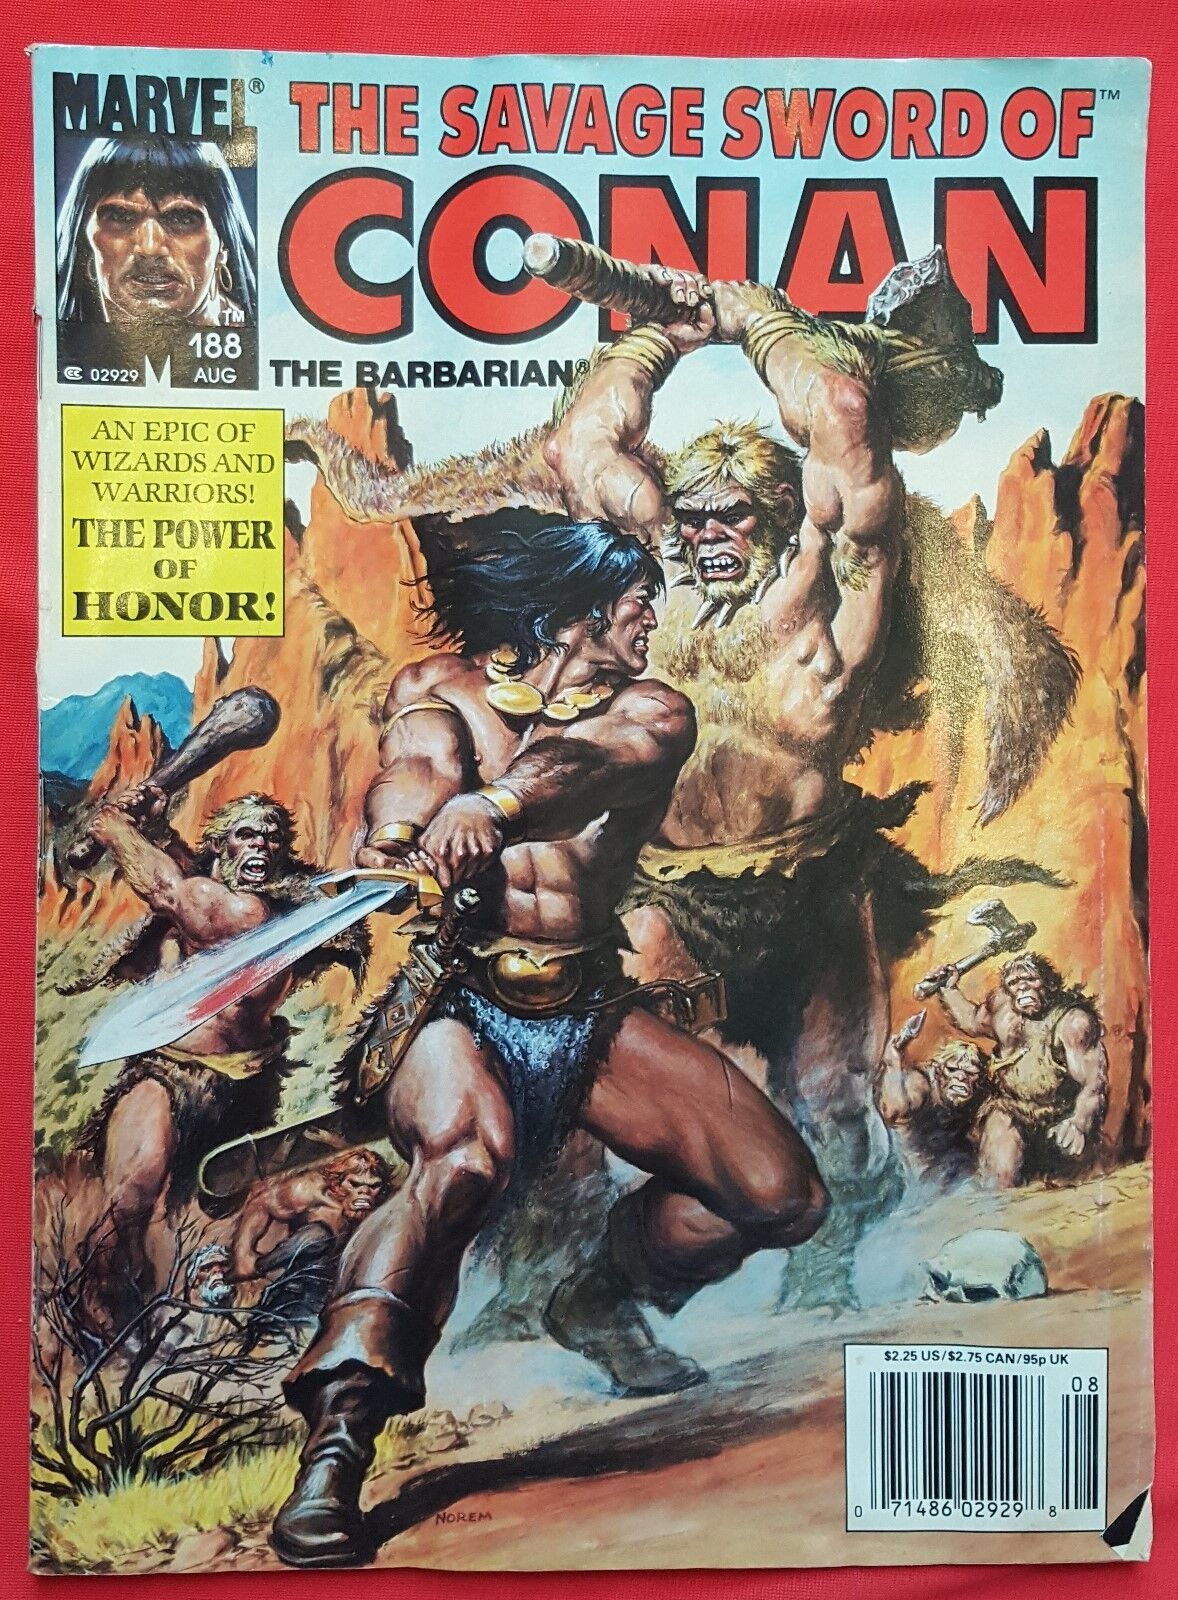 Primary image for The Savage Sword of Conan #188 (August 1991, Marvel Magazine)